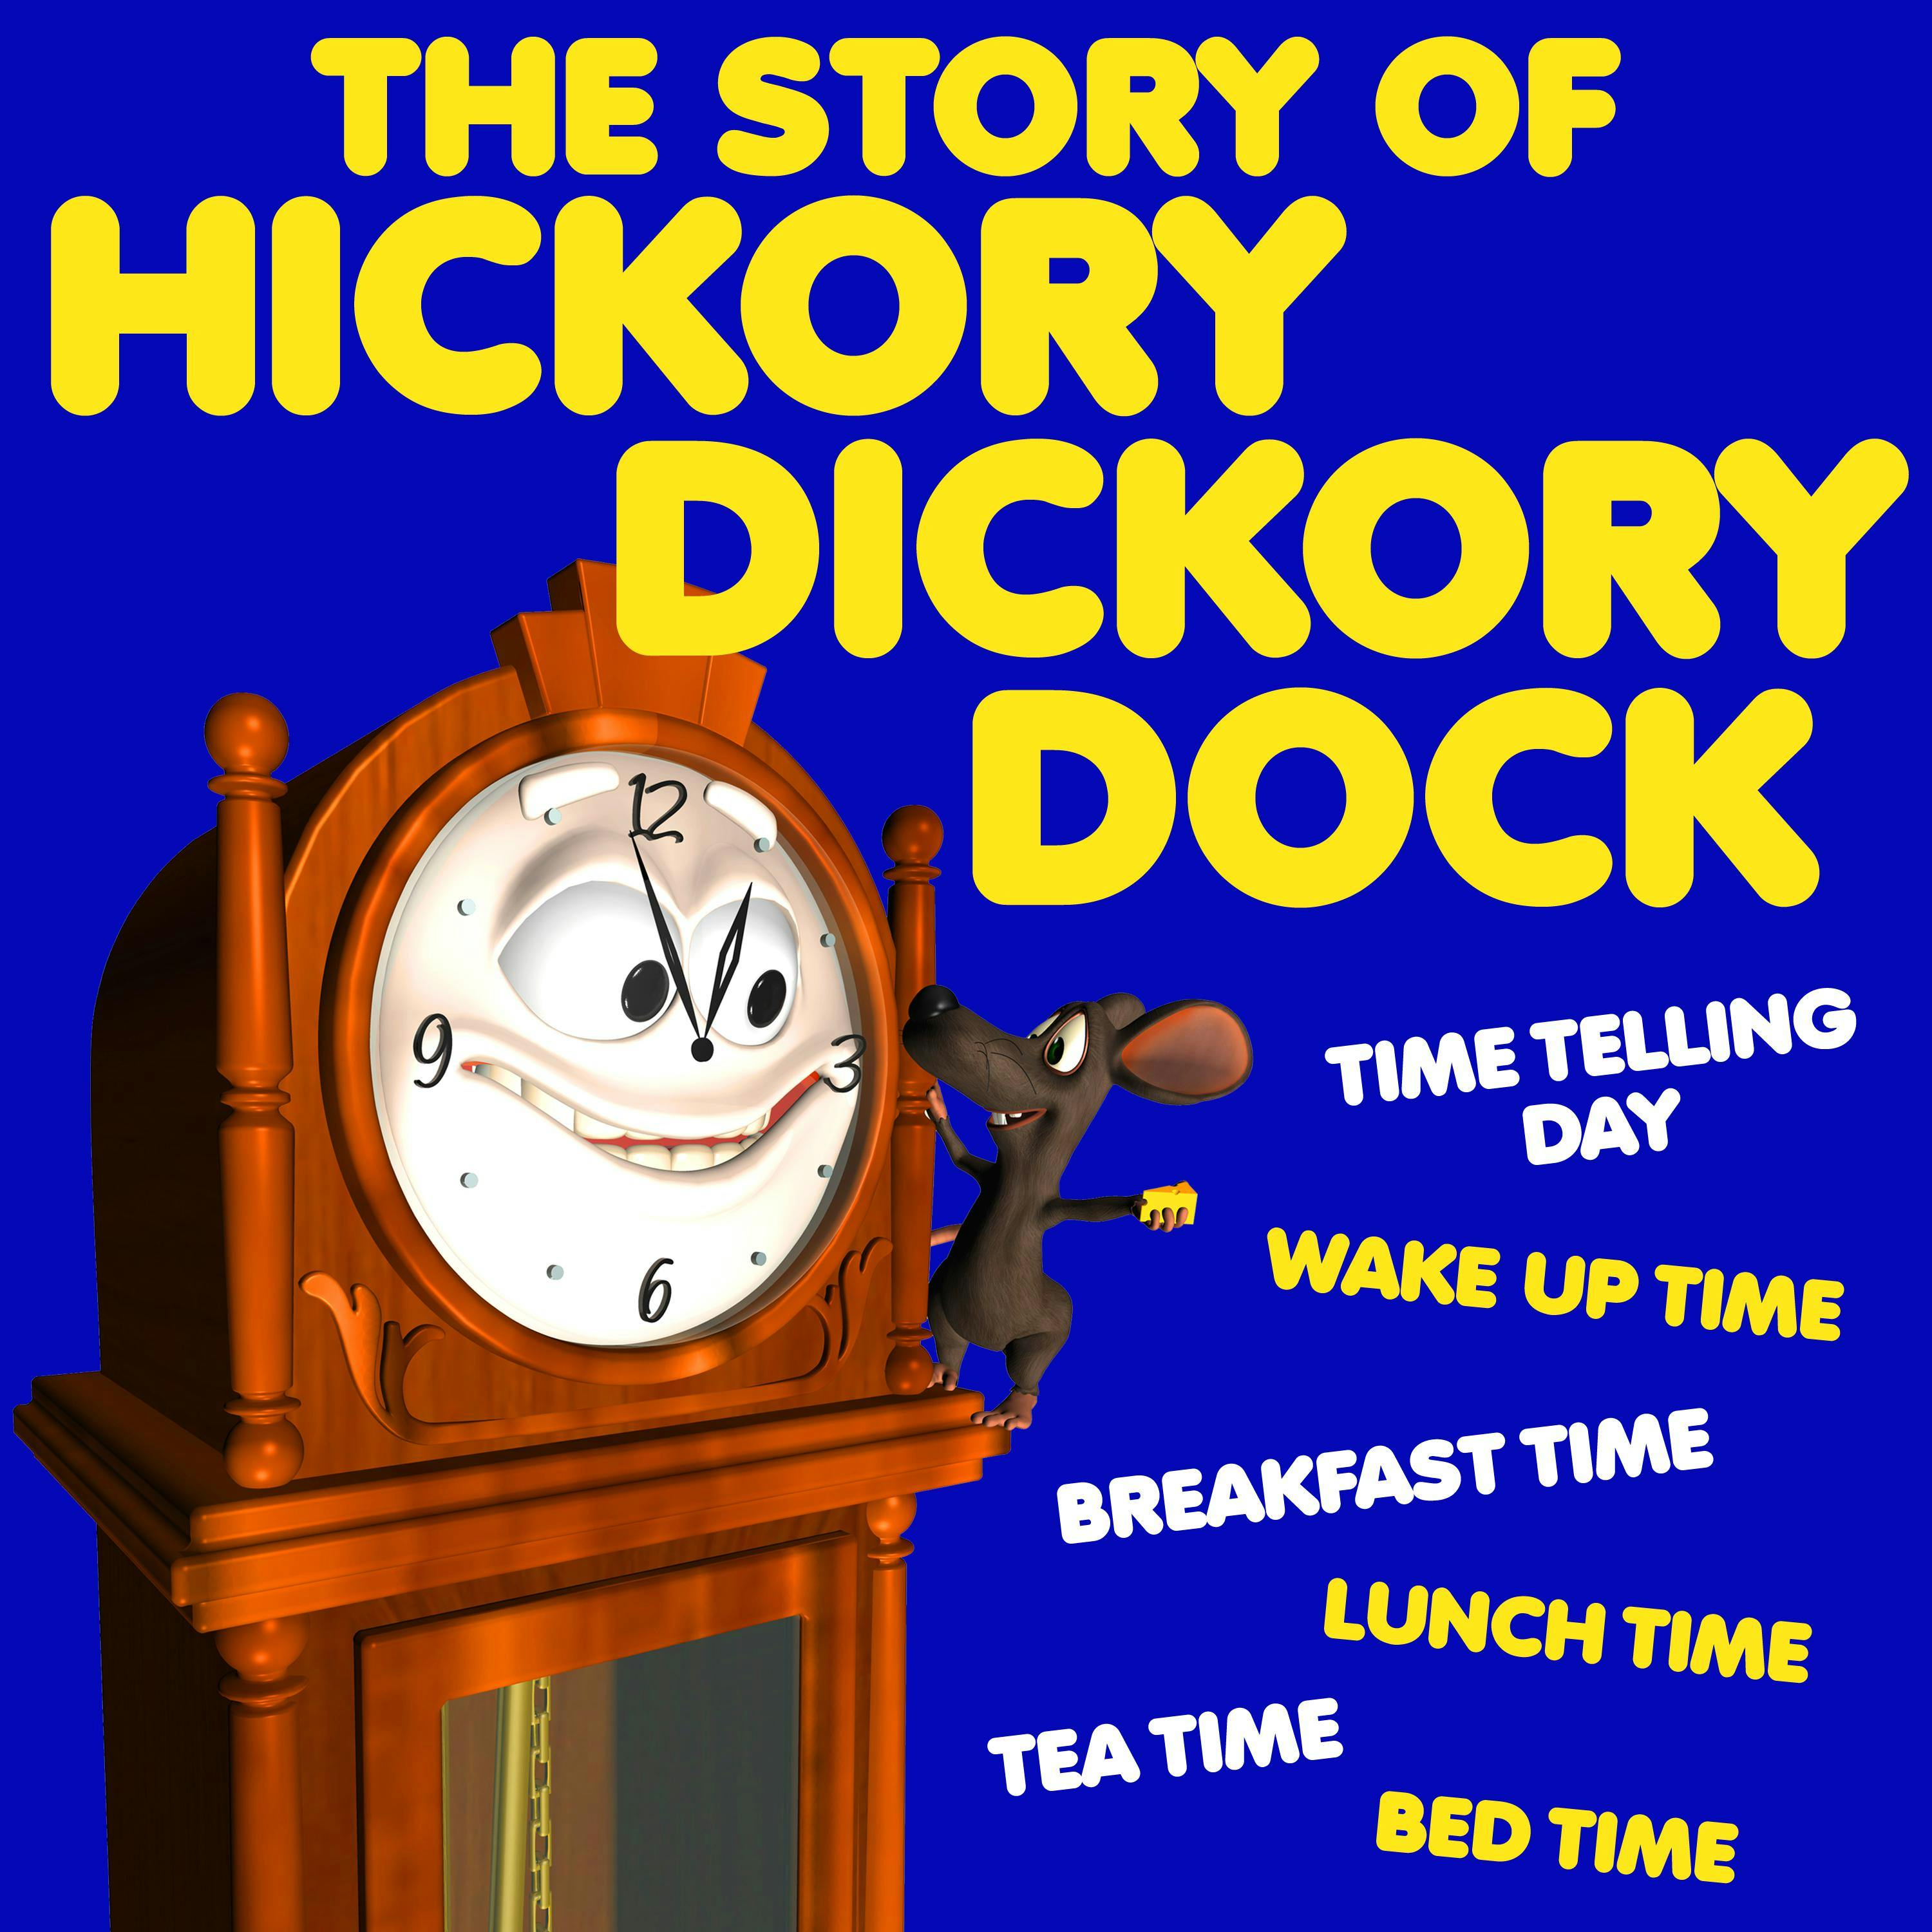 The Story of Hickory Dickory Dock - undefined